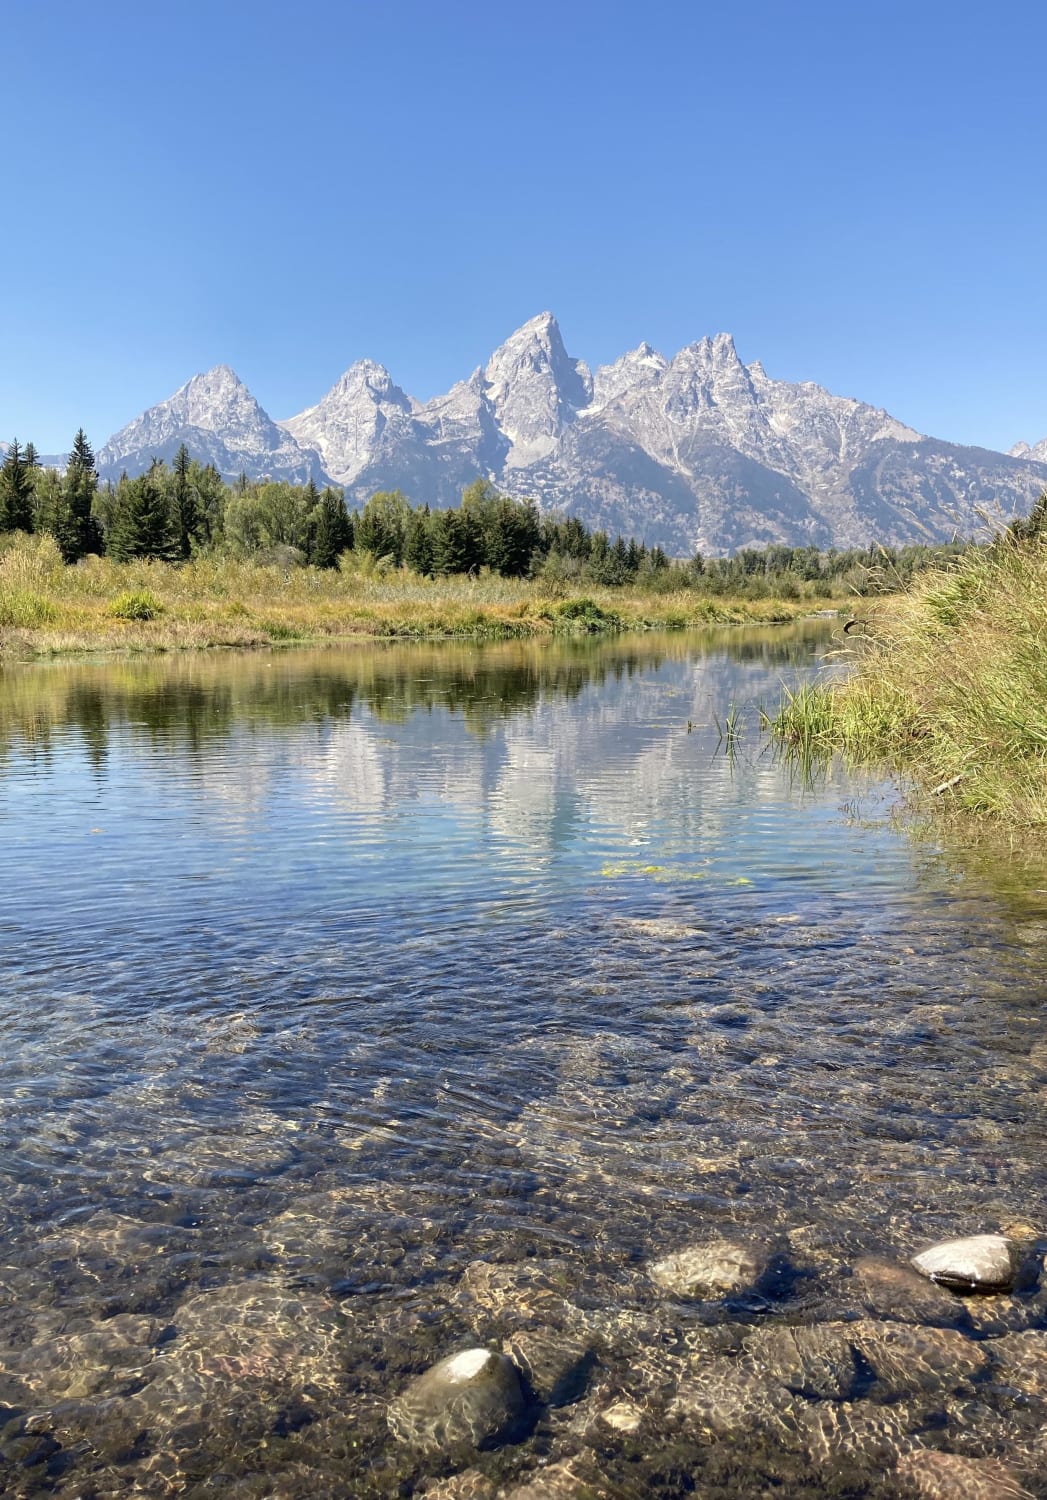 Grand Tetons this afternoon